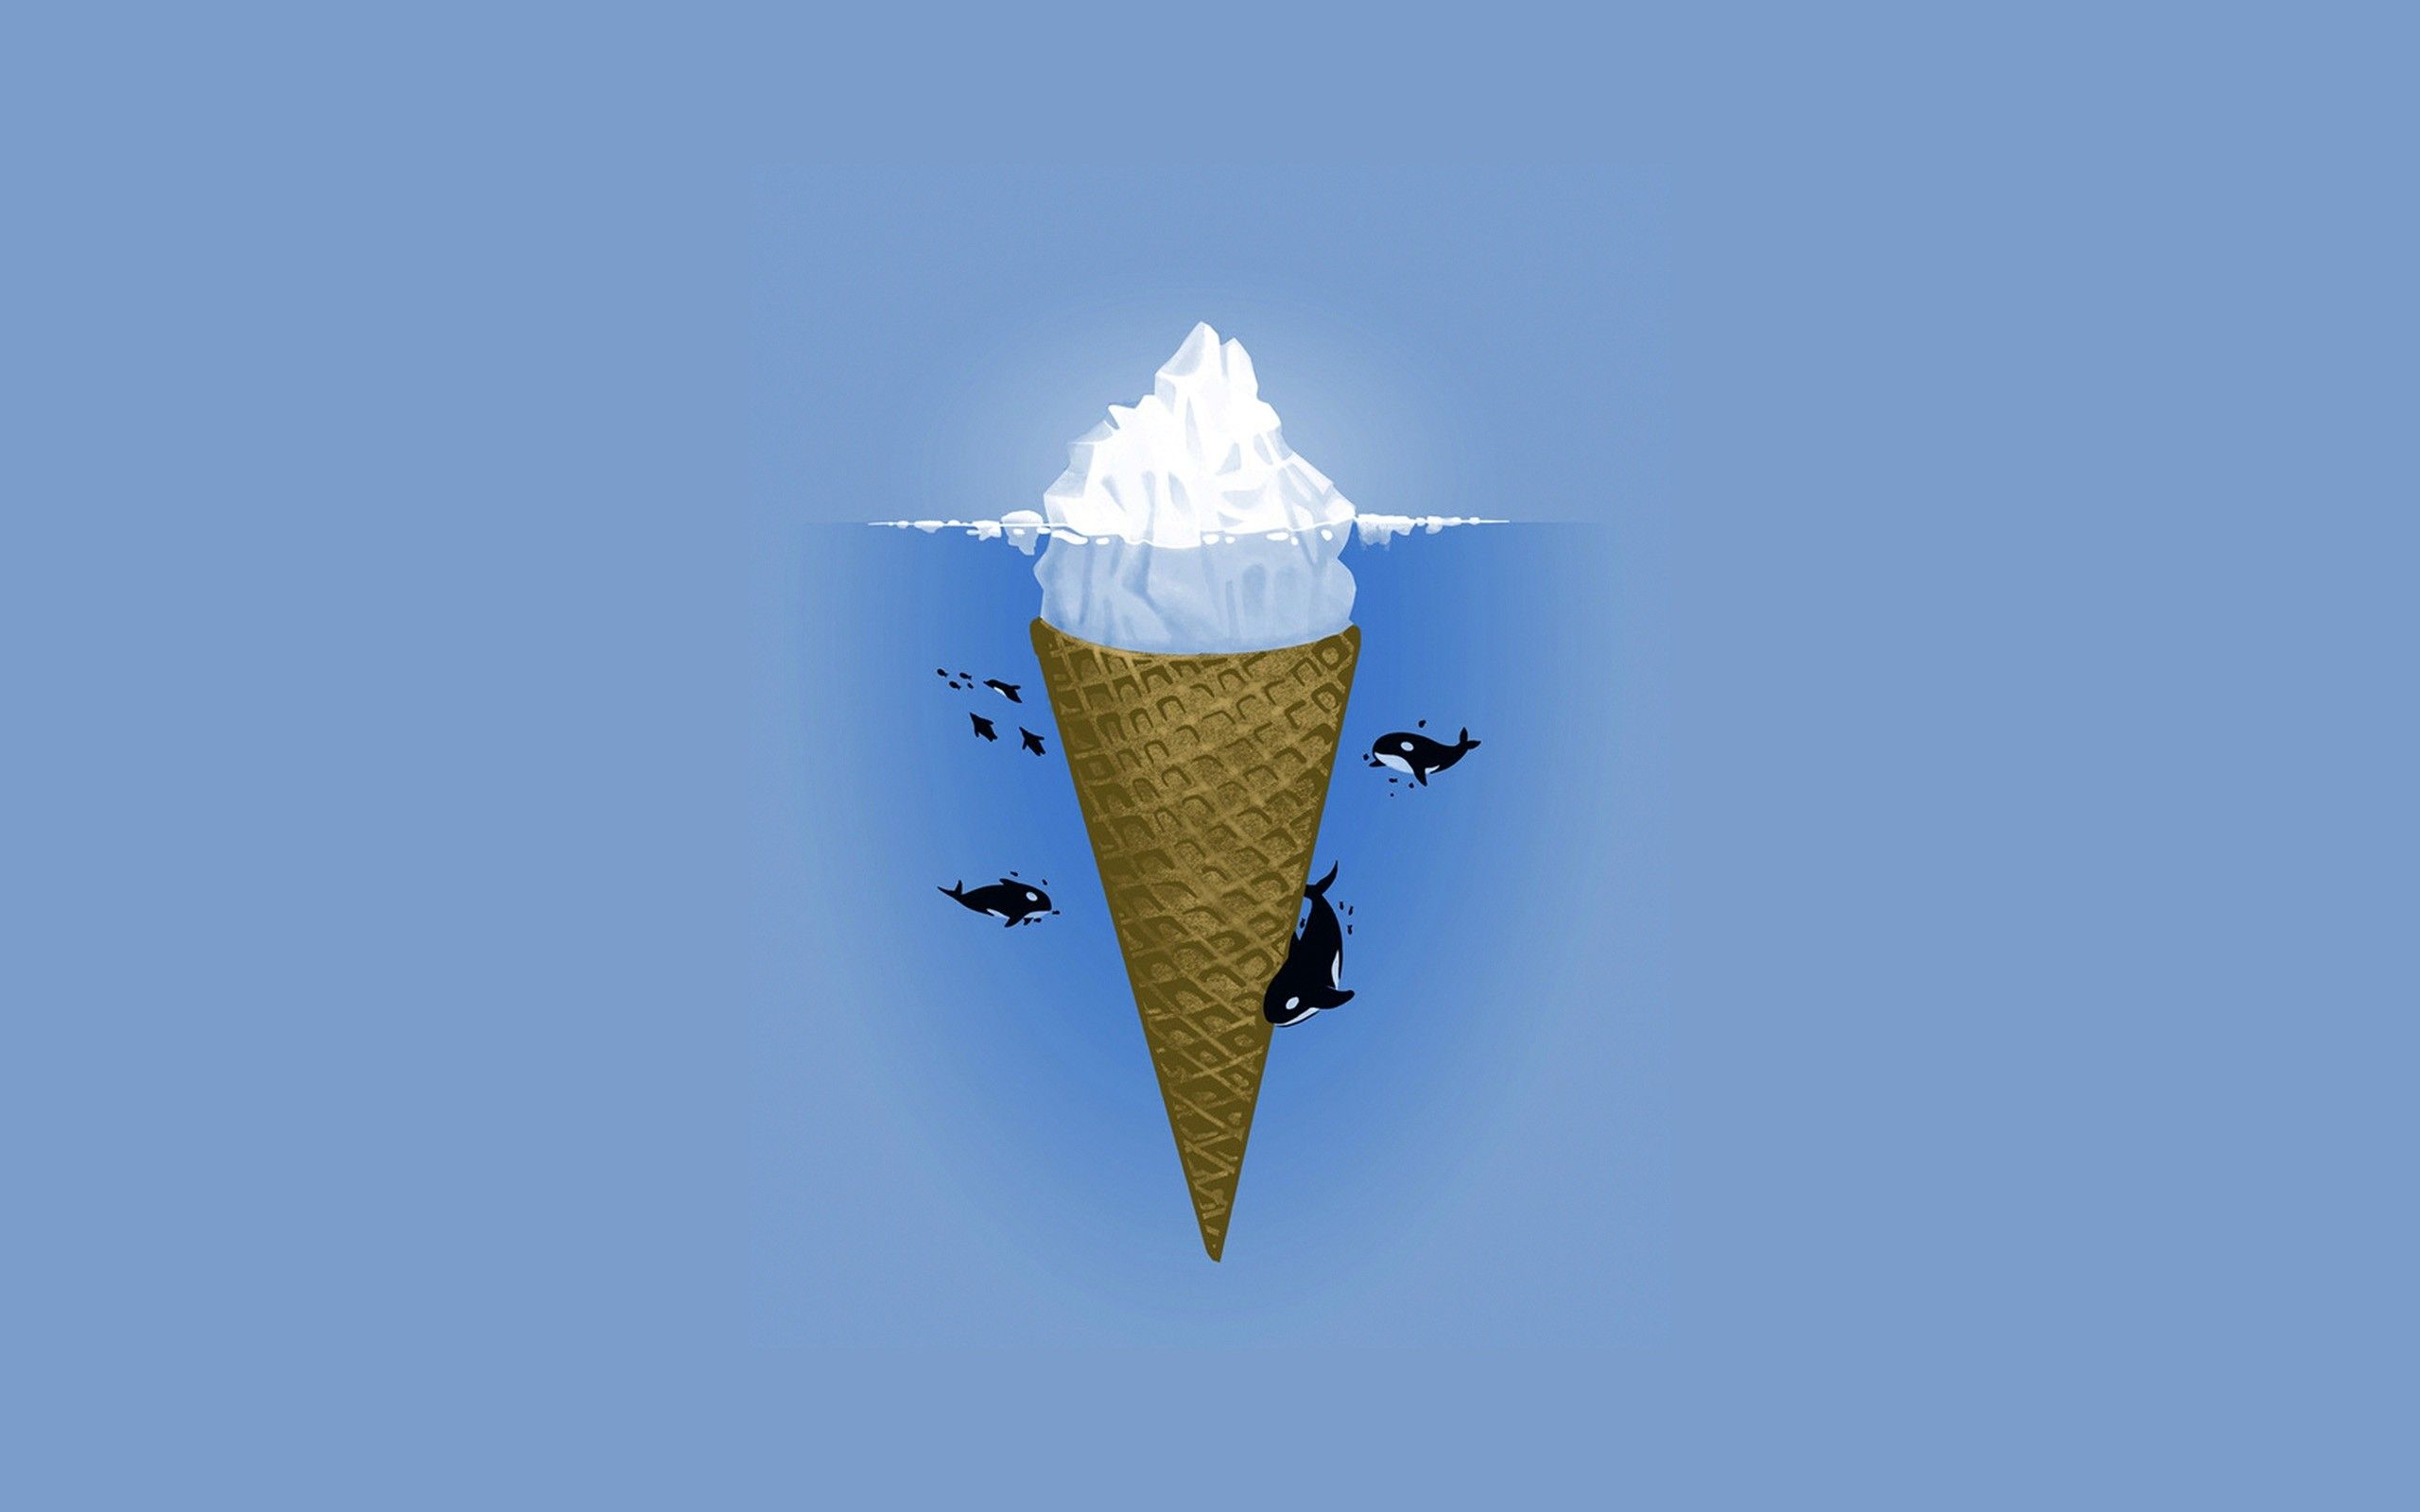 Cute Ice Cream Wallpapers